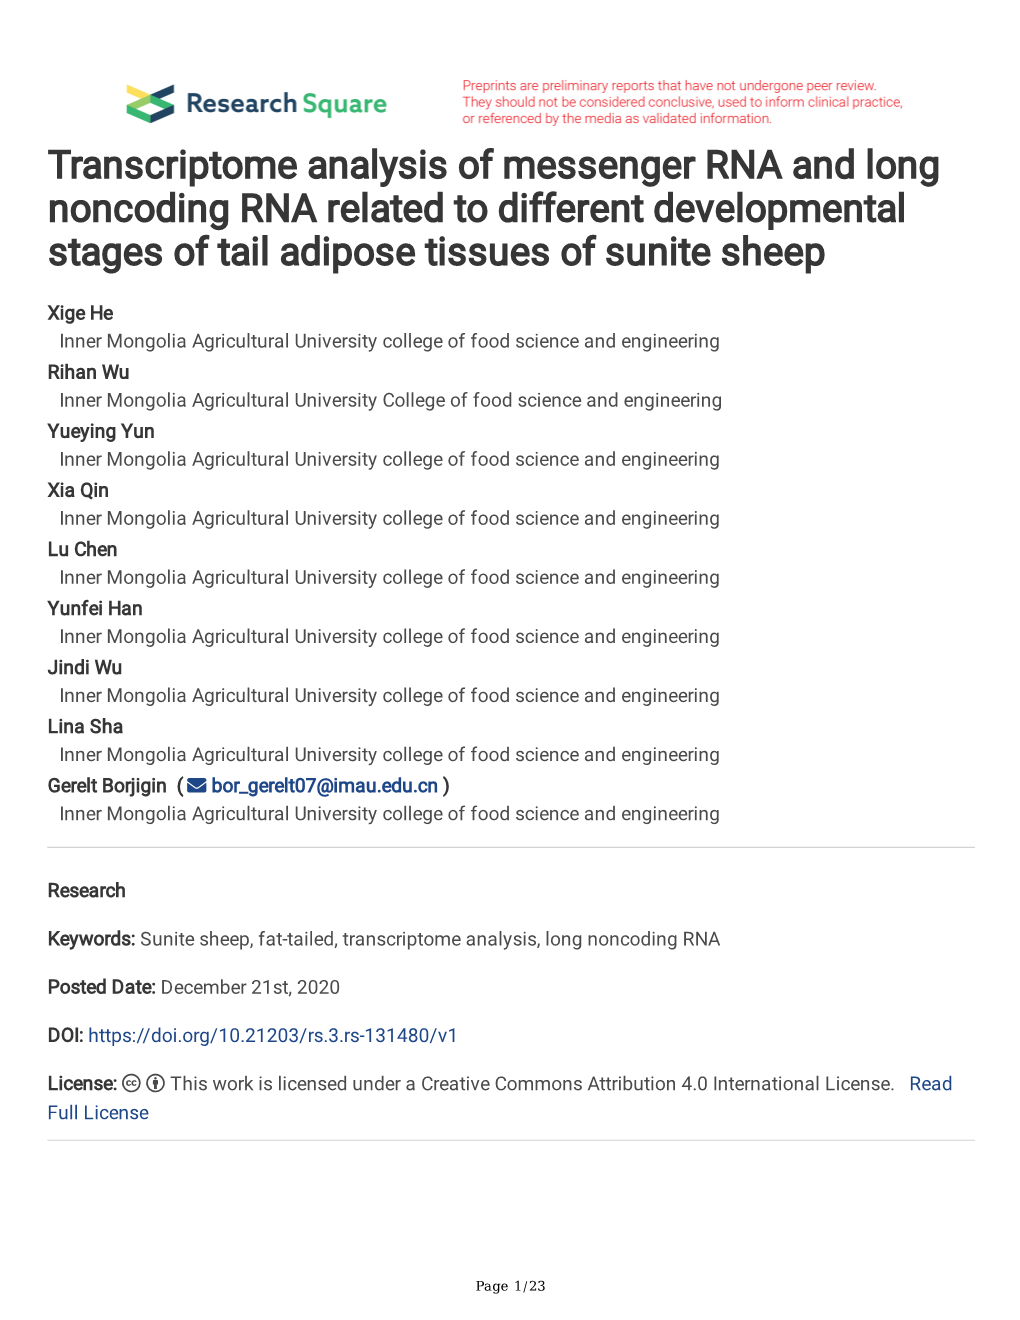 Transcriptome Analysis of Messenger RNA and Long Noncoding RNA Related to Different Developmental Stages of Tail Adipose Tissues of Sunite Sheep